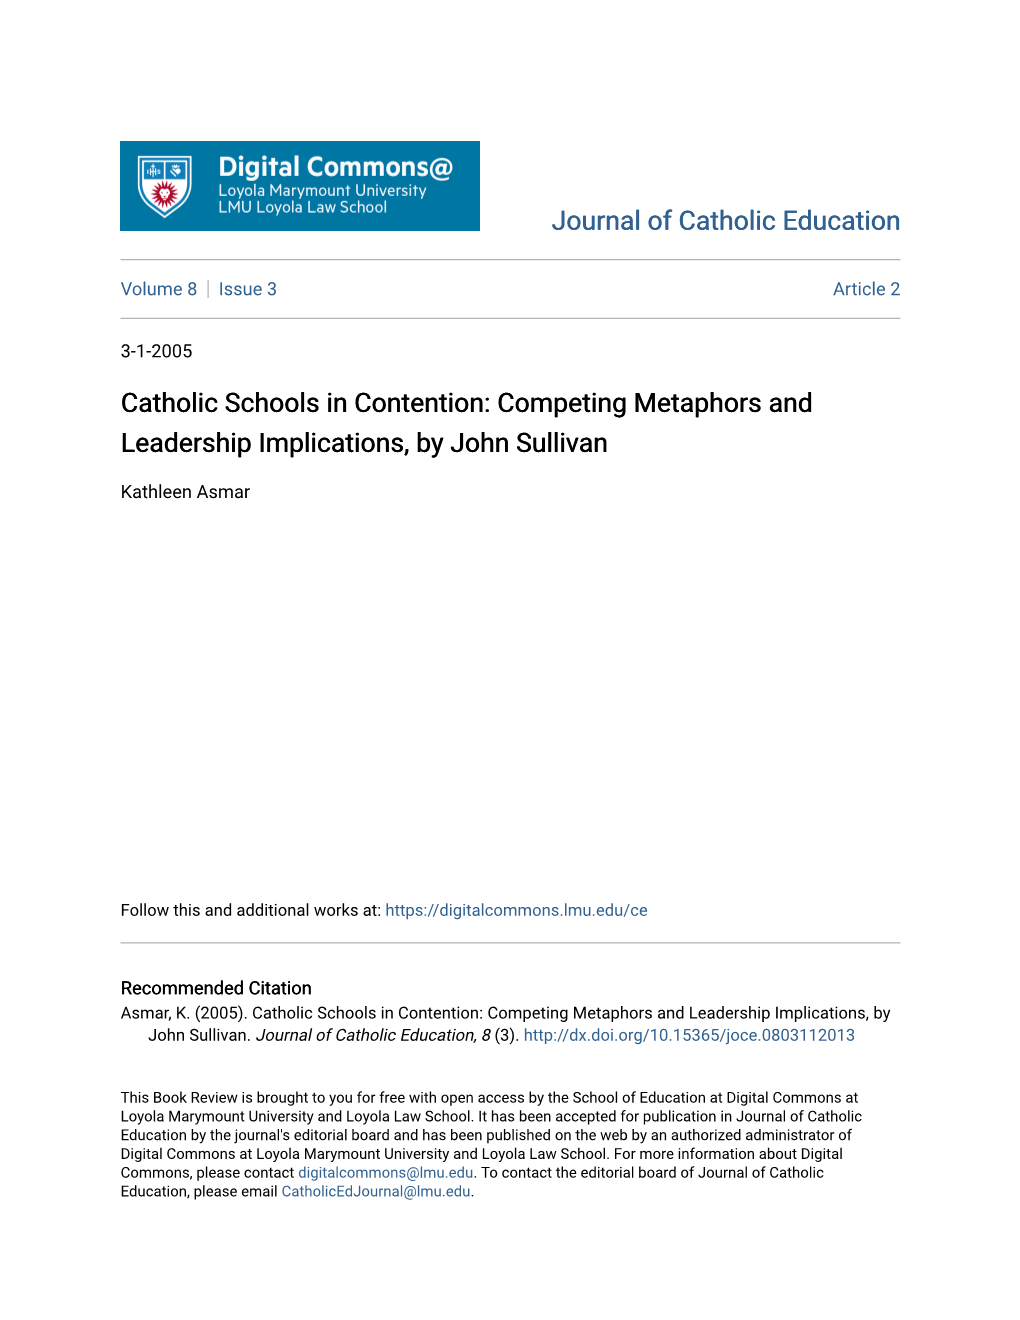 Catholic Schools in Contention: Competing Metaphors and Leadership Implications, by John Sullivan